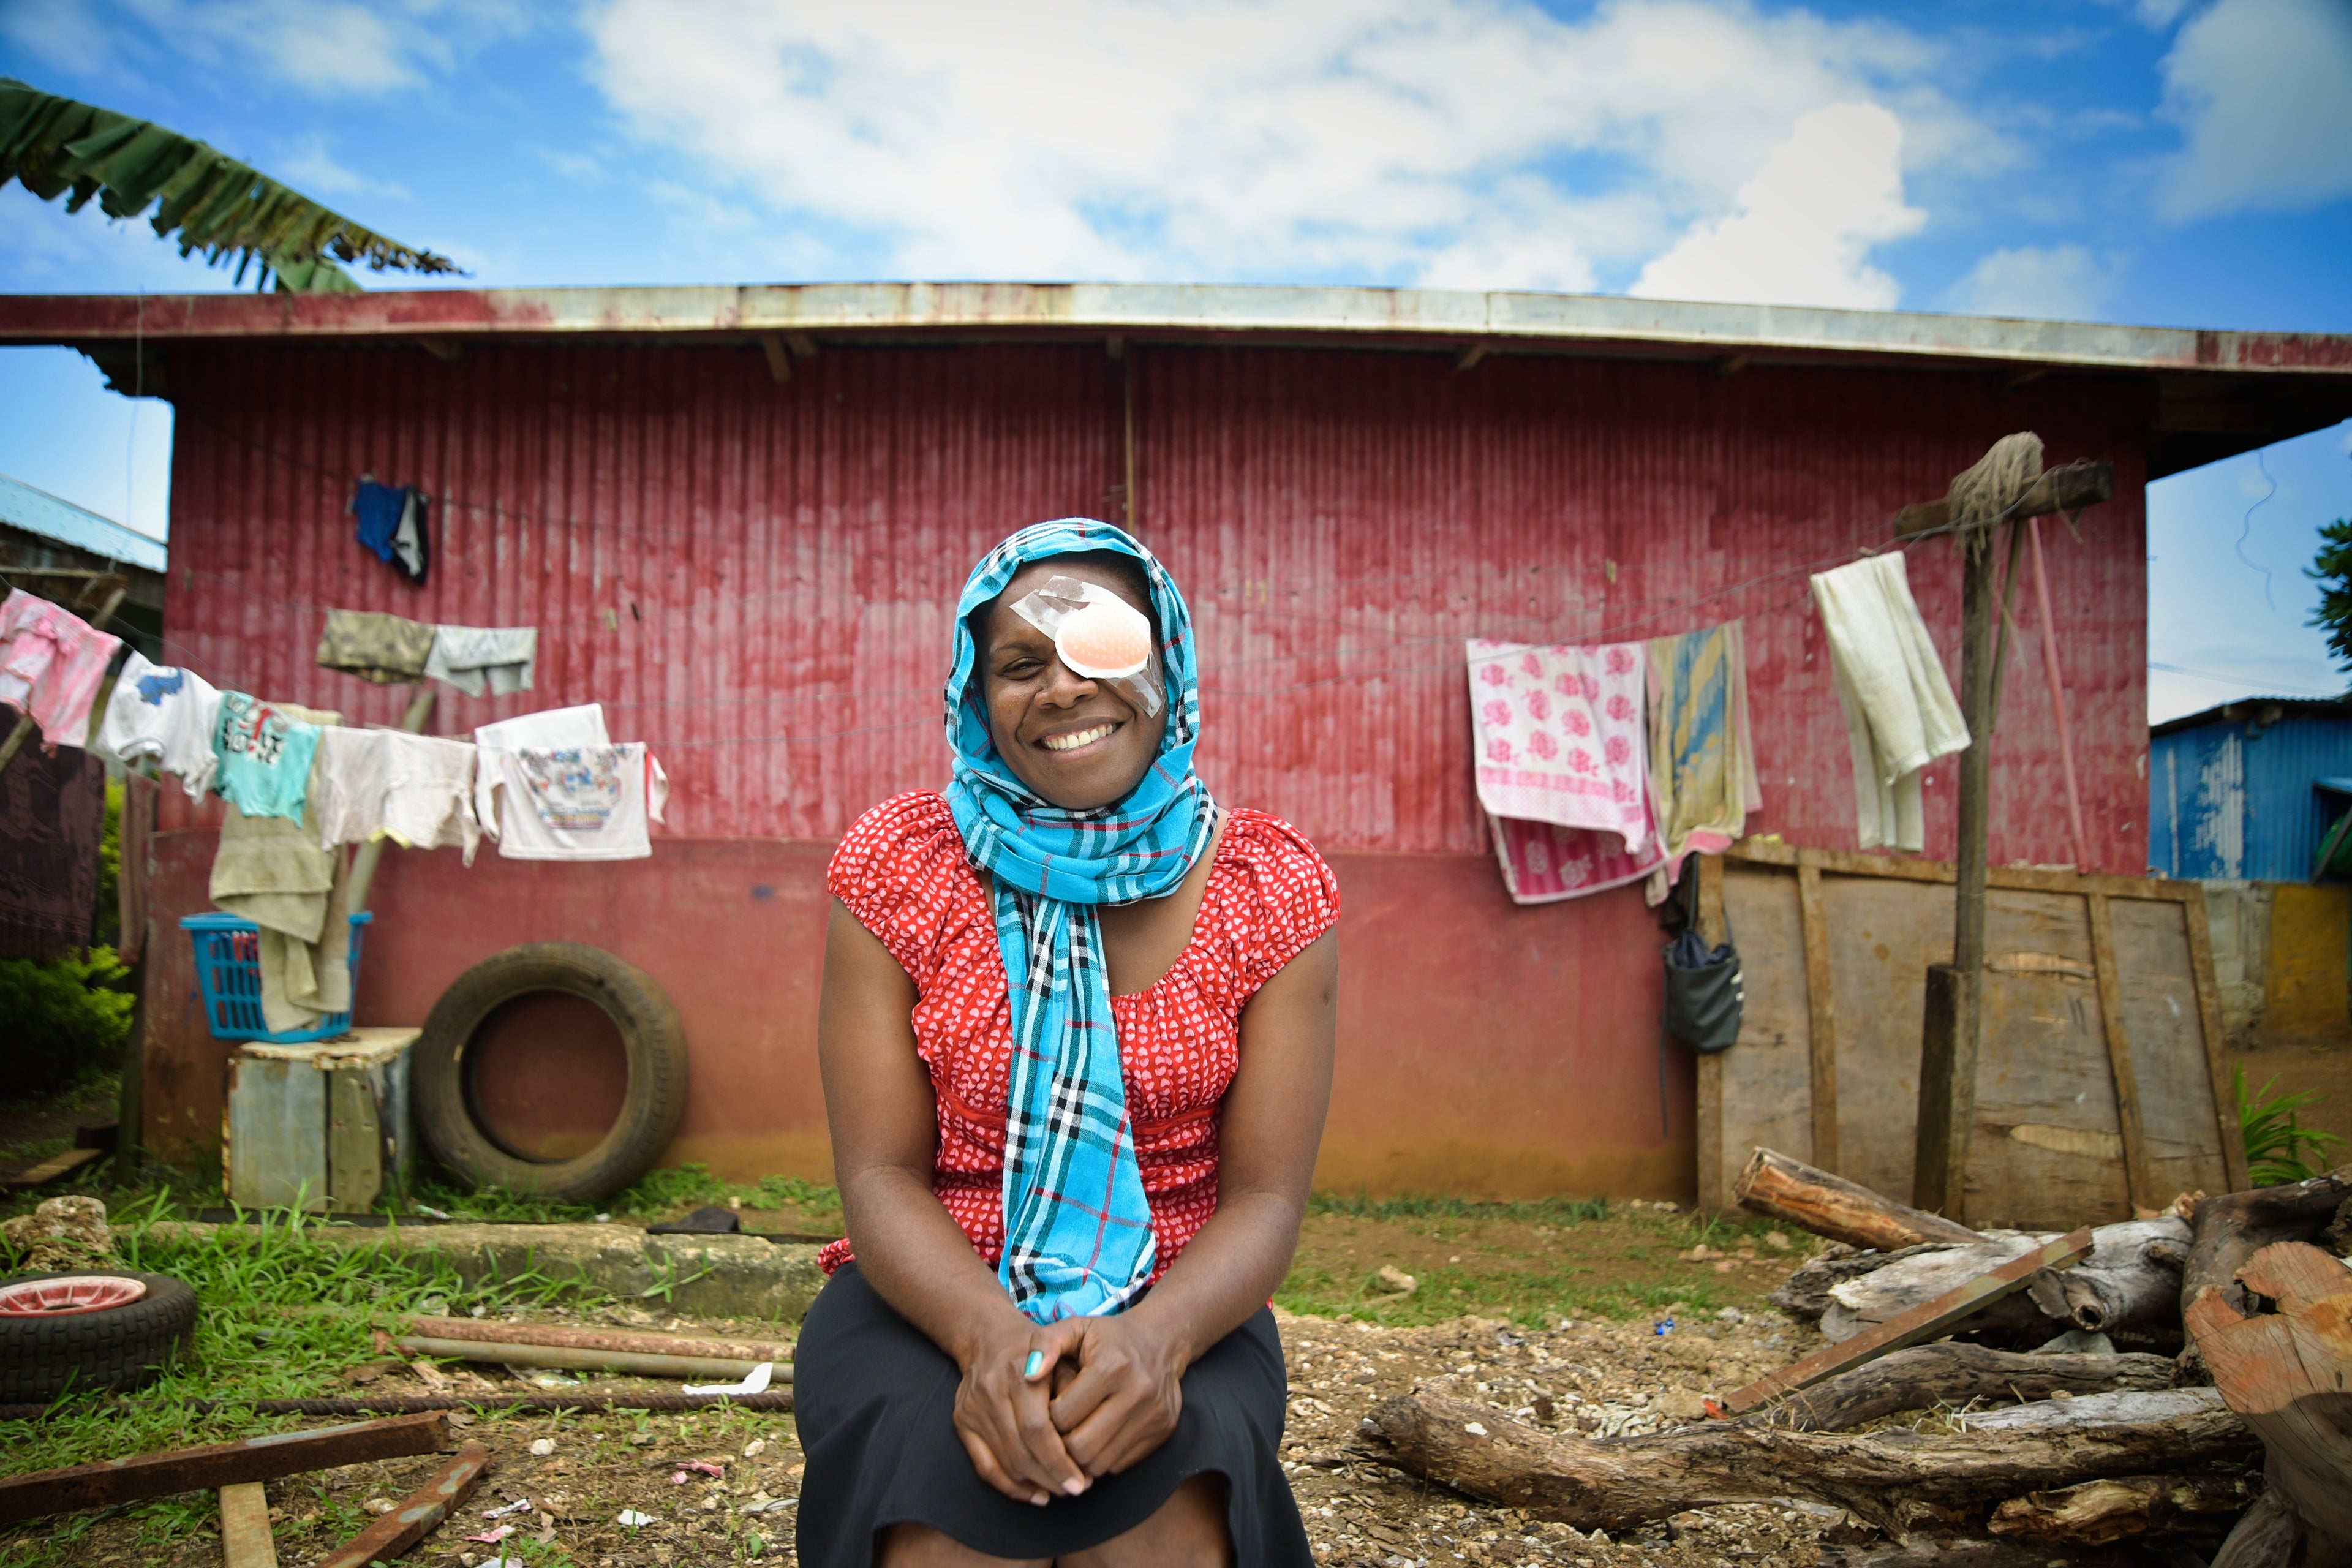 Pacific Island woman with eye patch smiling after curing blindness and restoring eye sight.